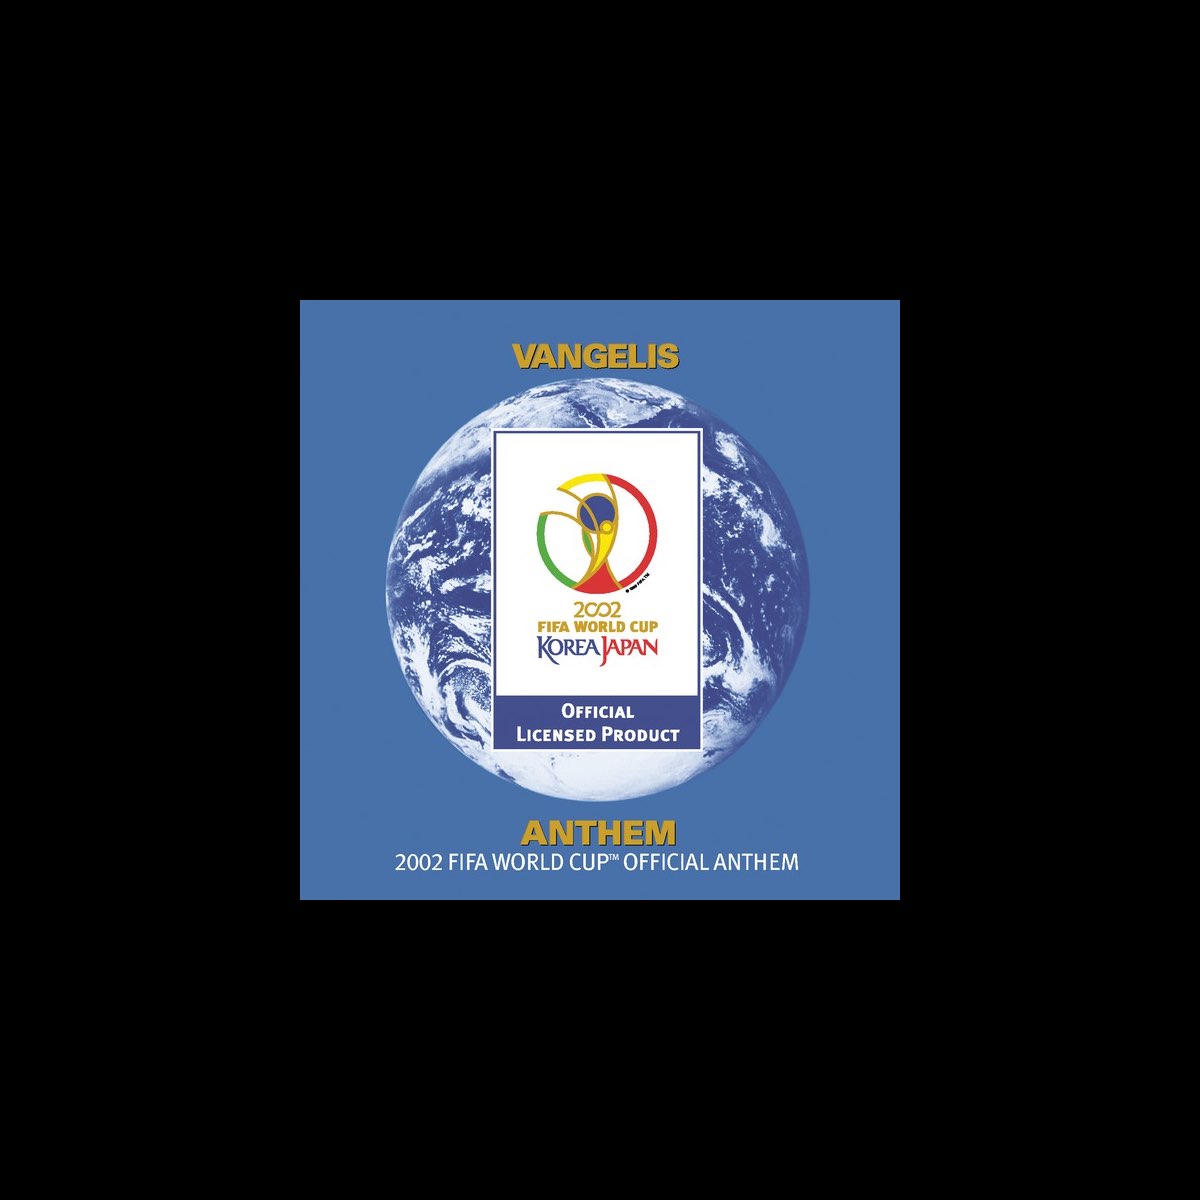 Vangelis Anthem The 02 Fifa World Cup Official Anthem Commercial Single Ep By Vangelis On Apple Music